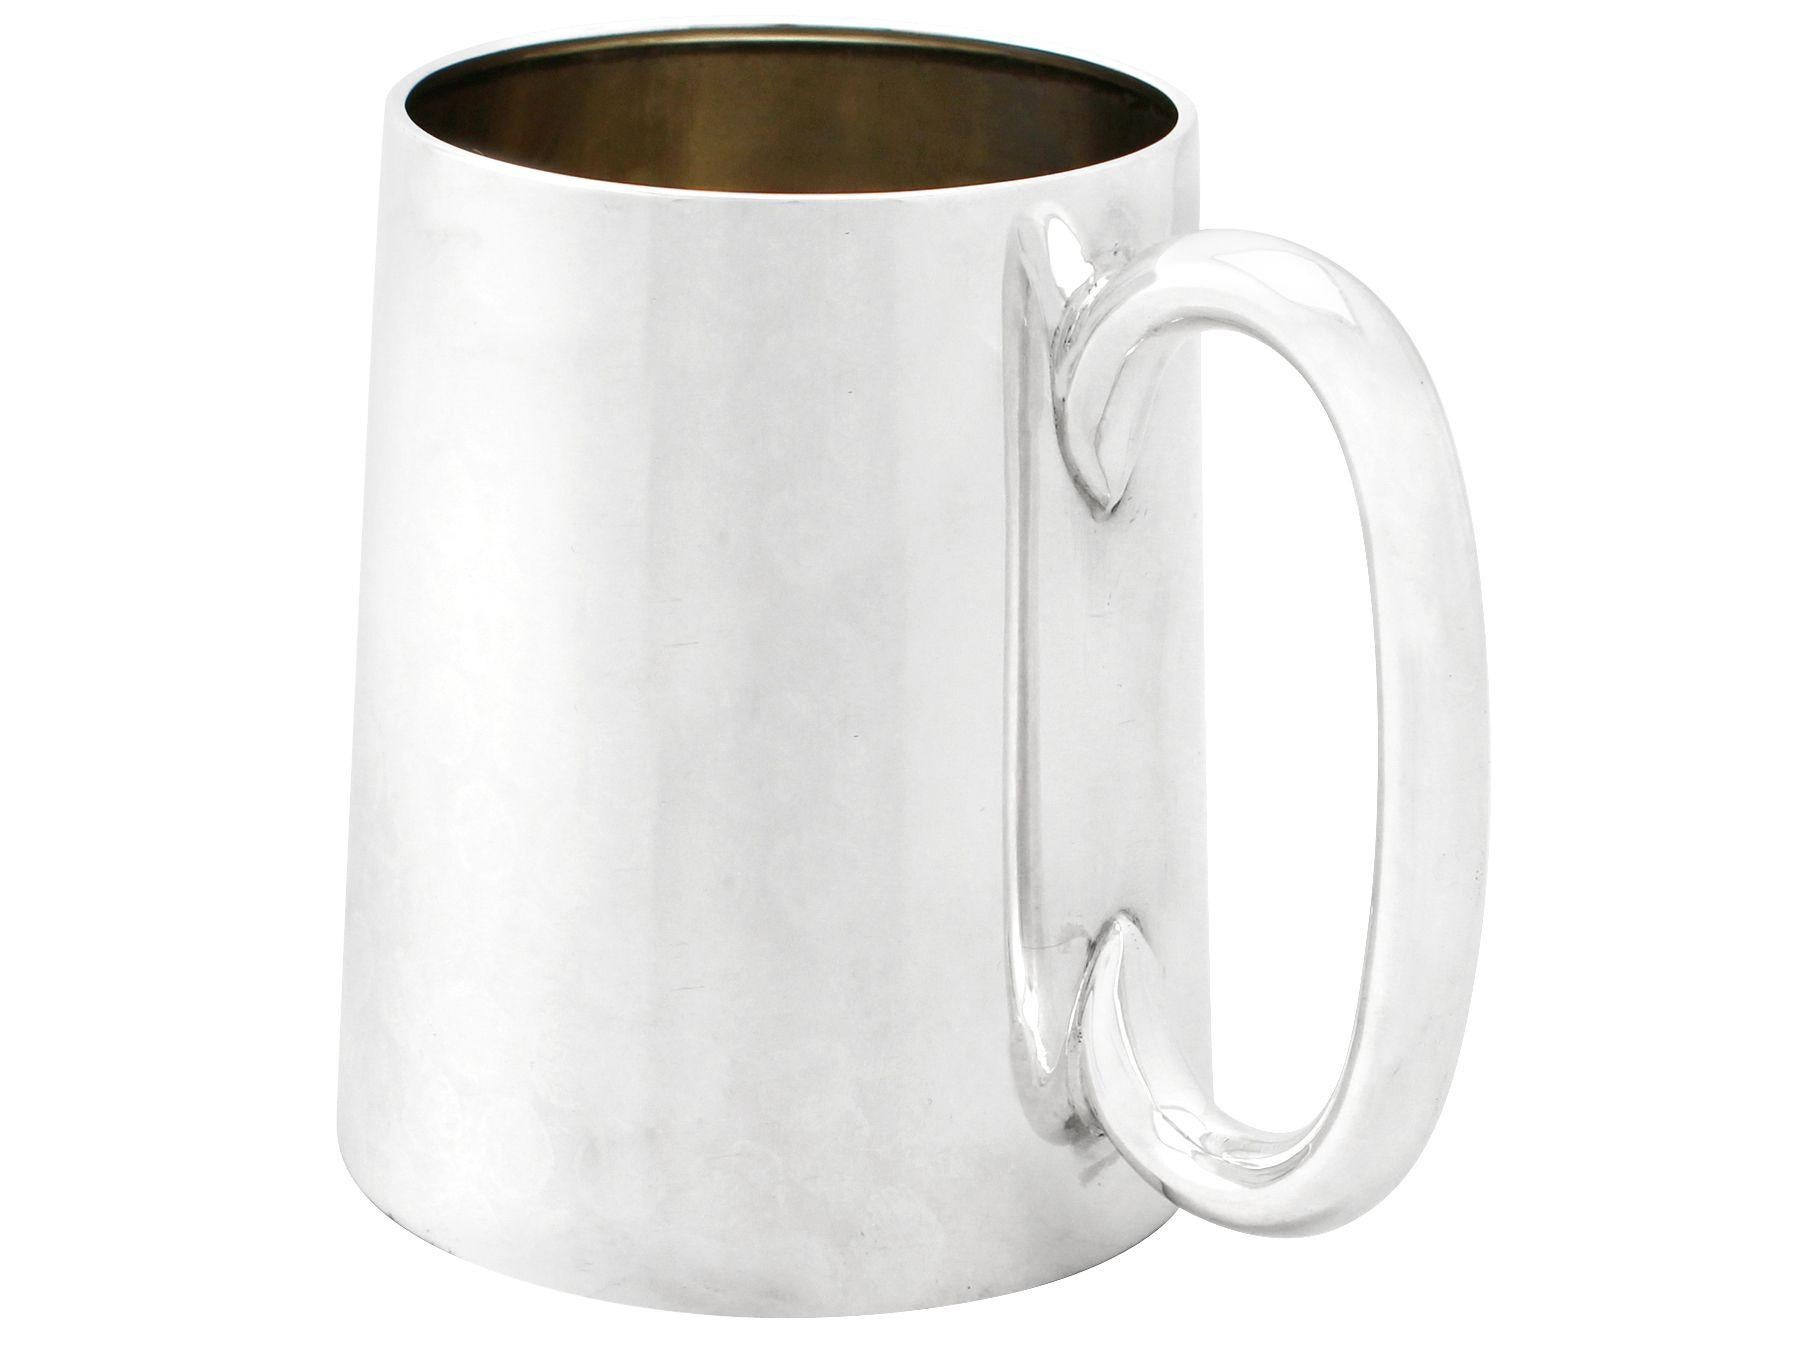 Hamilton & Co. Indian Colonial Silver and Glass Pint Mug In Excellent Condition For Sale In Jesmond, Newcastle Upon Tyne